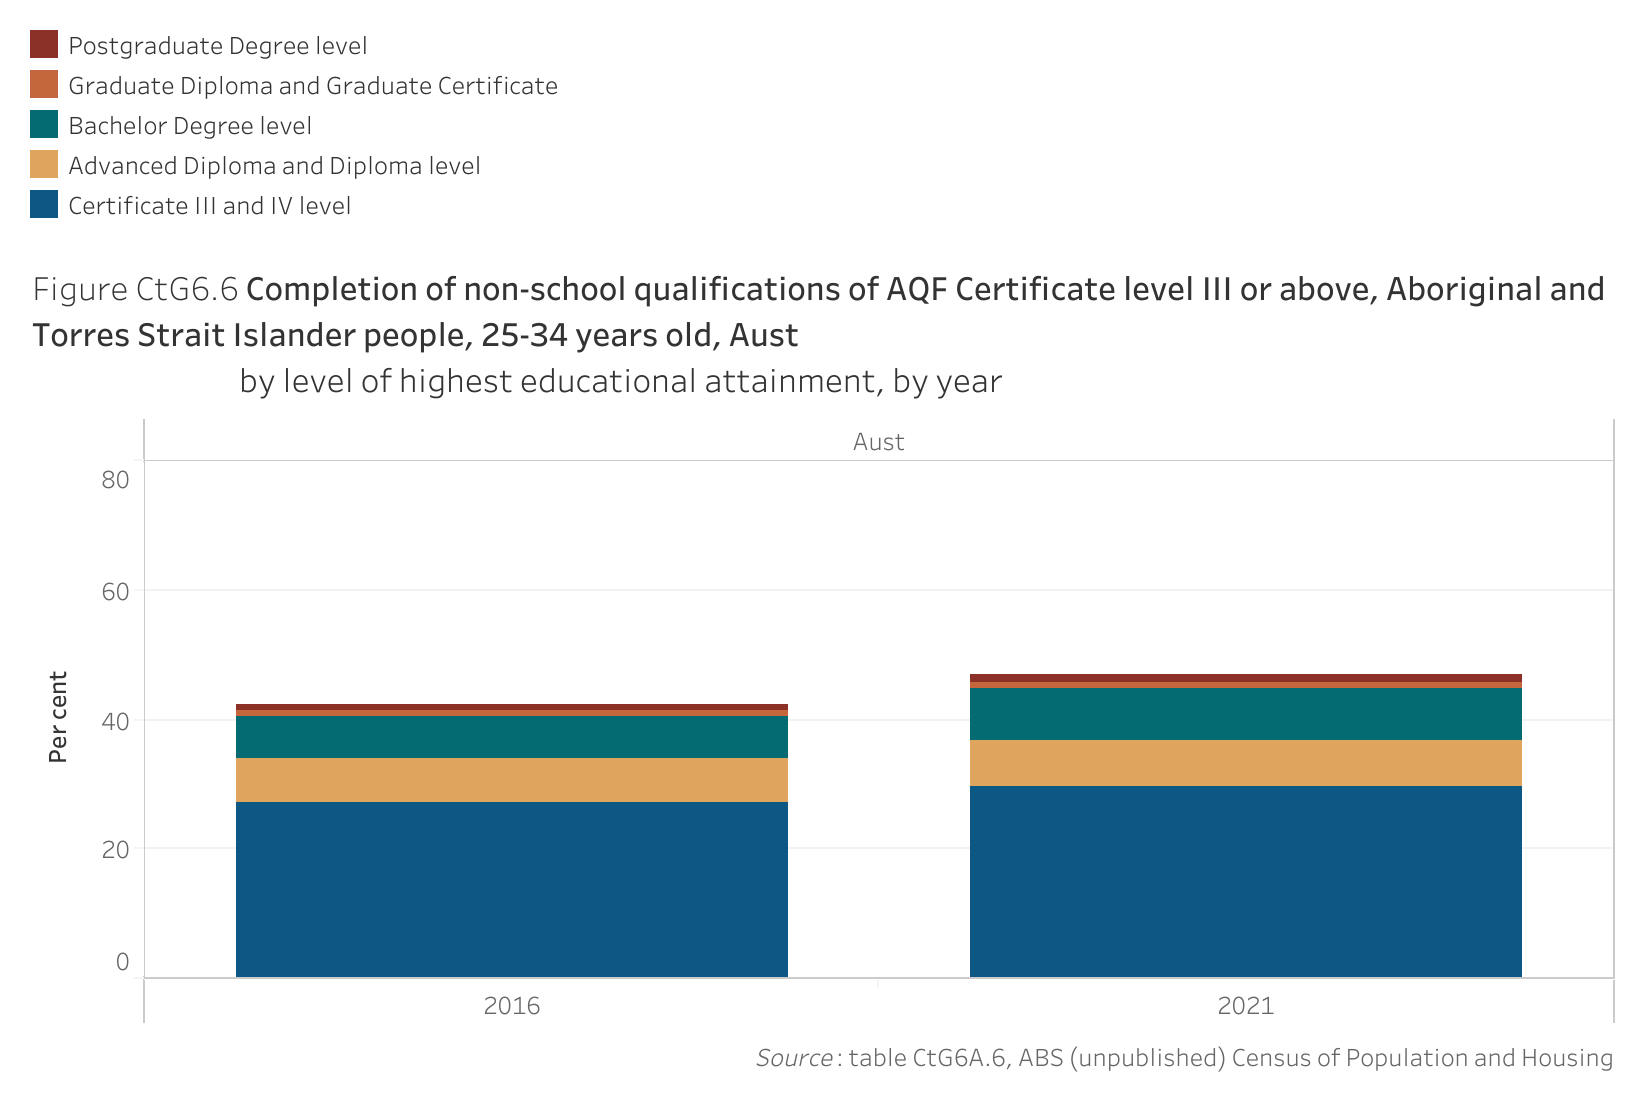 Figure CtG6.6 shows the completion of non-school qualifications of Australian Qualifications Framework Certificate level III or above, Aboriginal and Torres Strait Islander people, 25-34 years old, Australia, by level of highest educational attainment, by year. More details can be found within the text near this image.